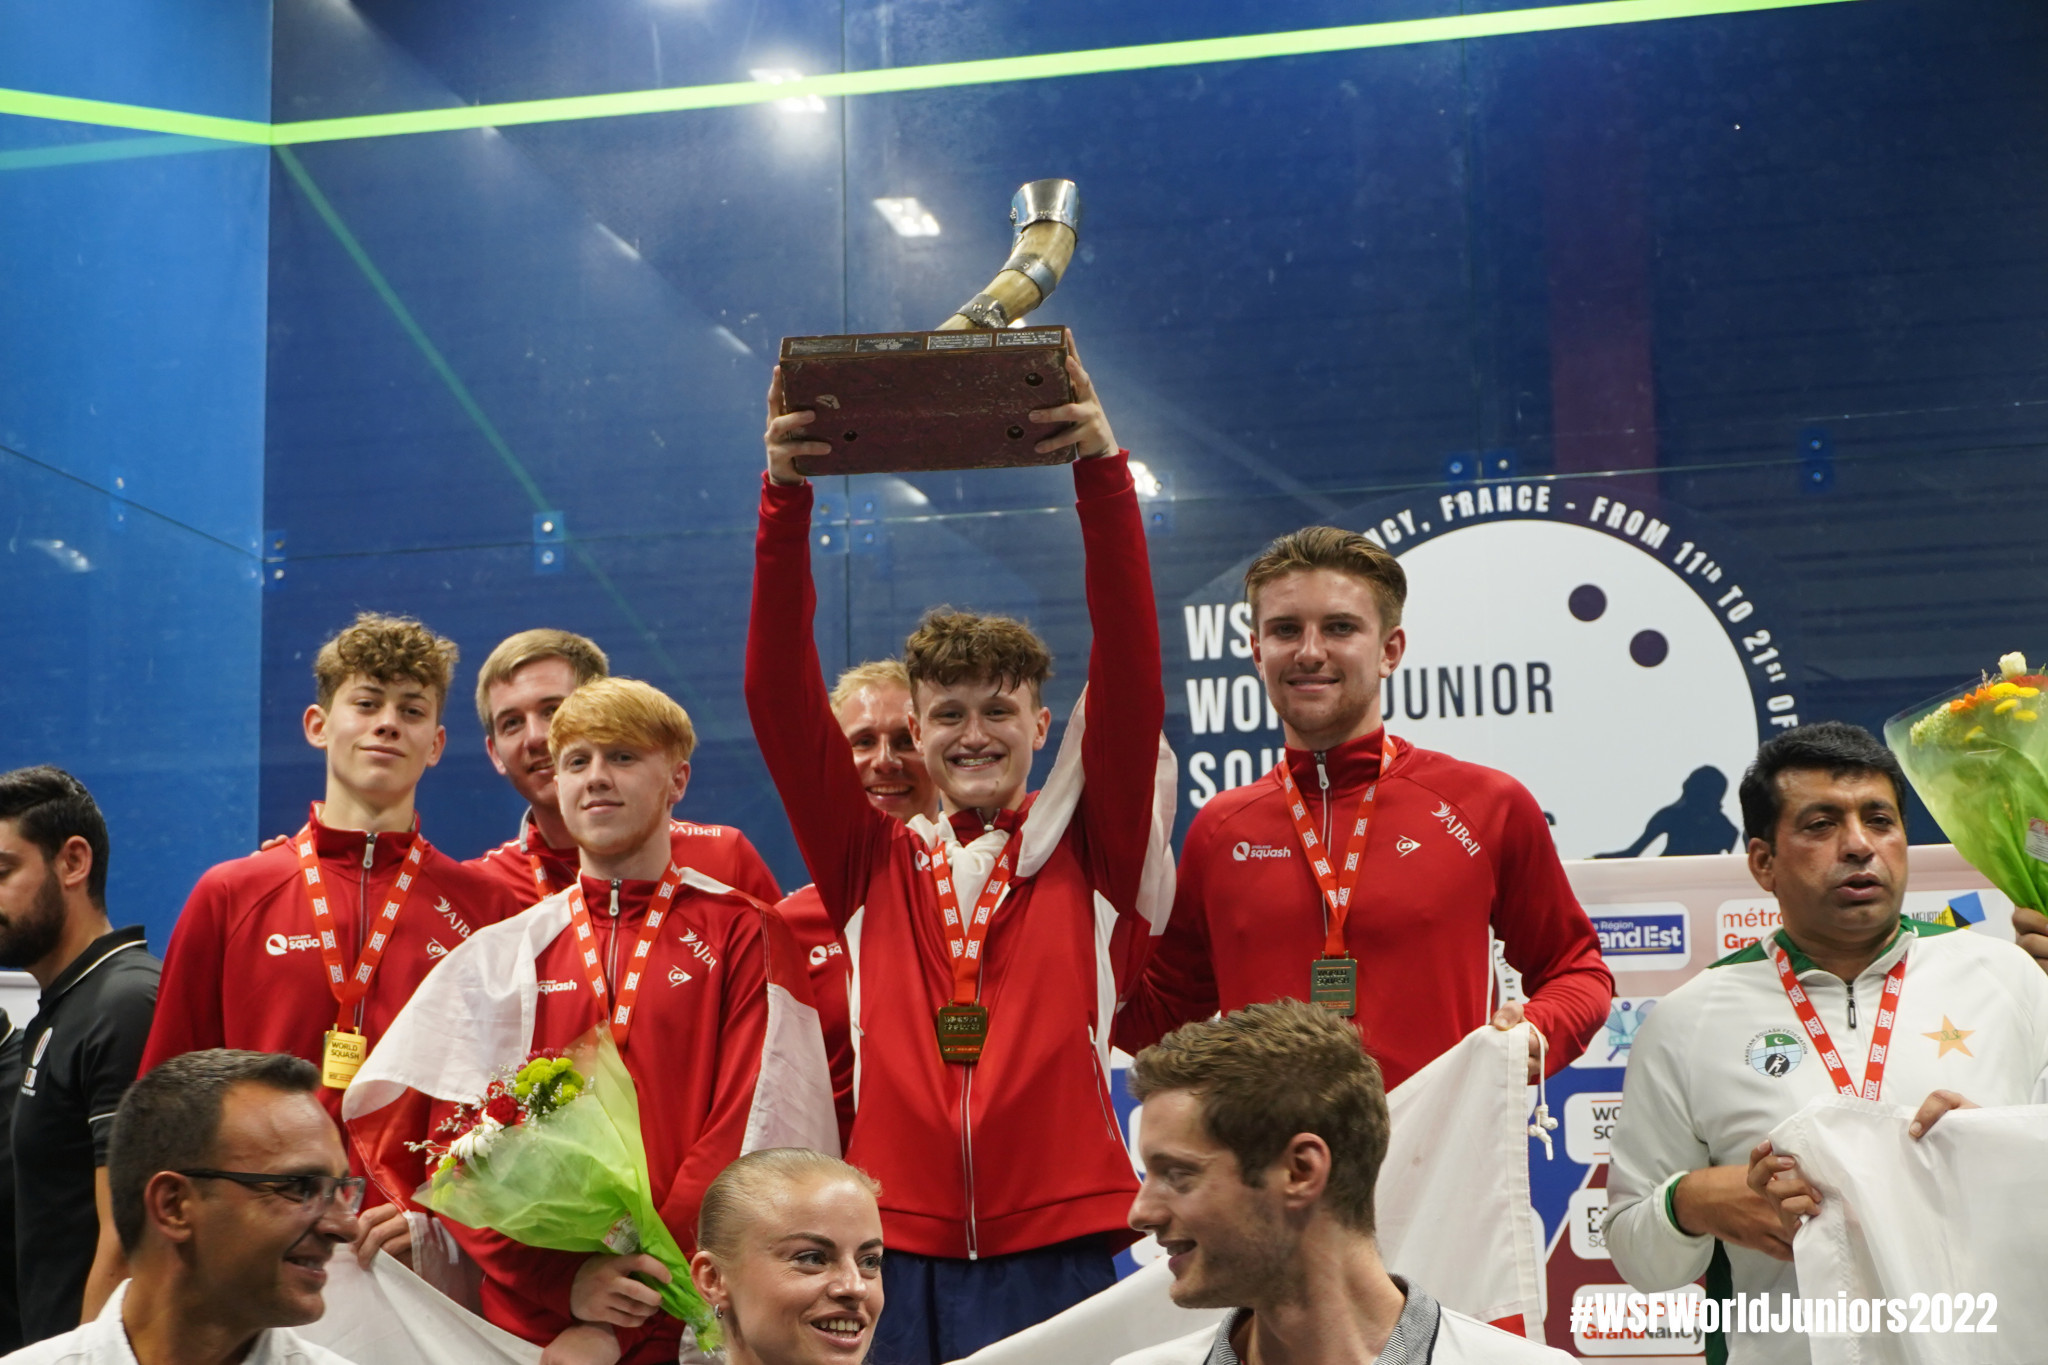 England take first Men's World Junior Squash Championships team gold in 22 years